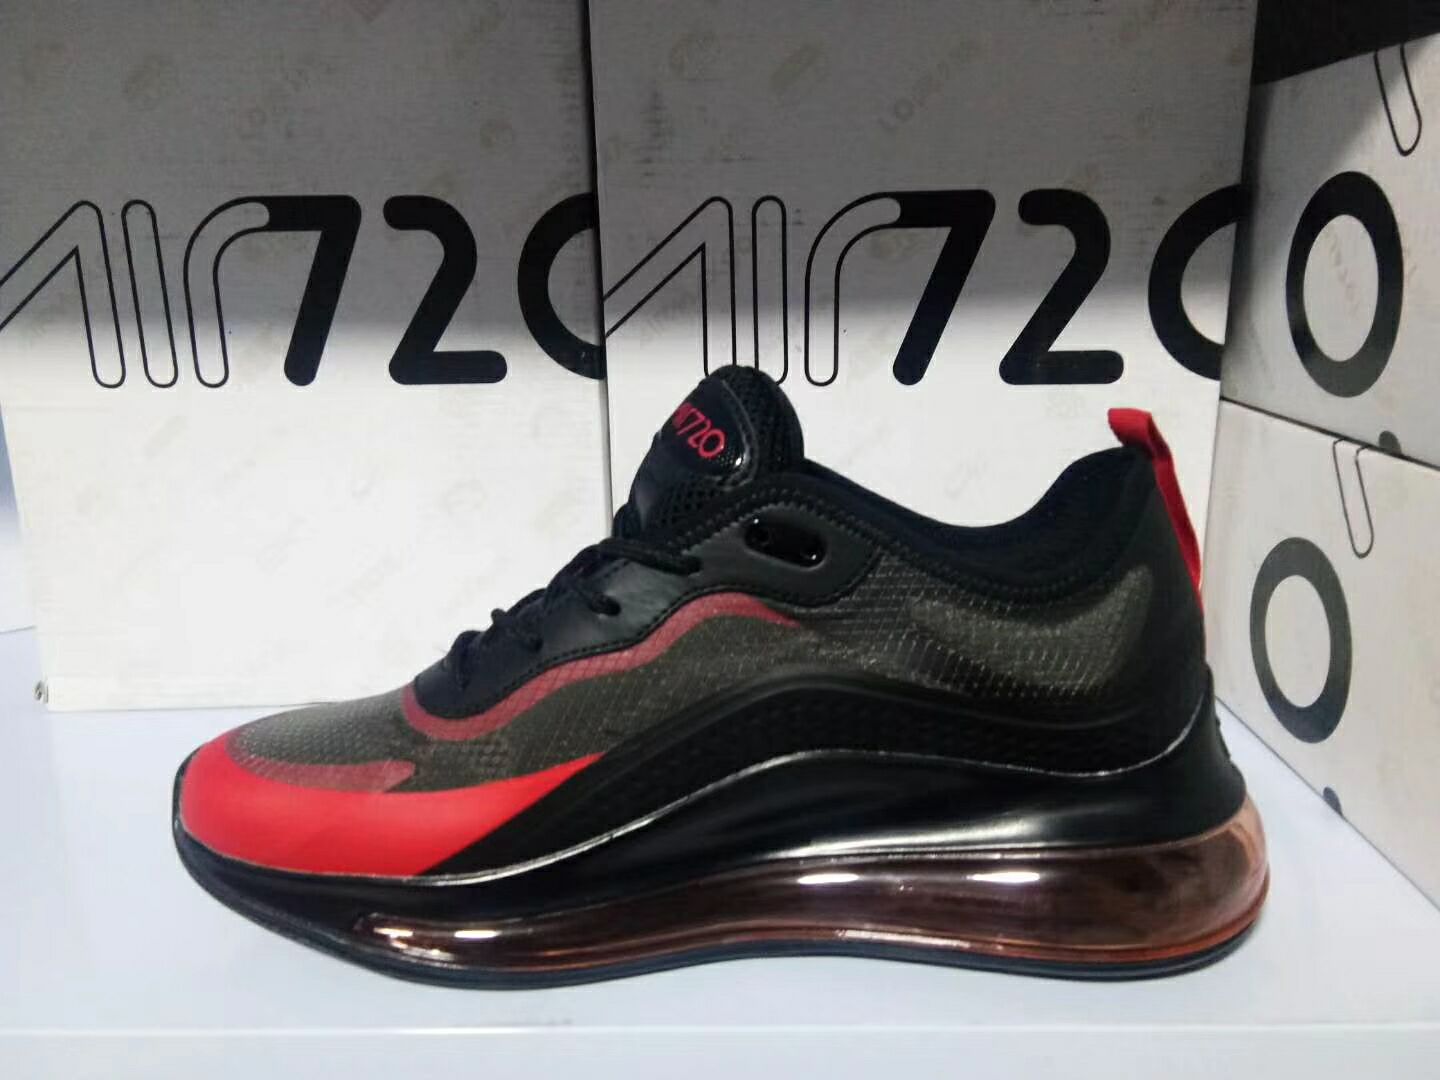 Nike Air Max 720 II Black Red Shoes - Click Image to Close